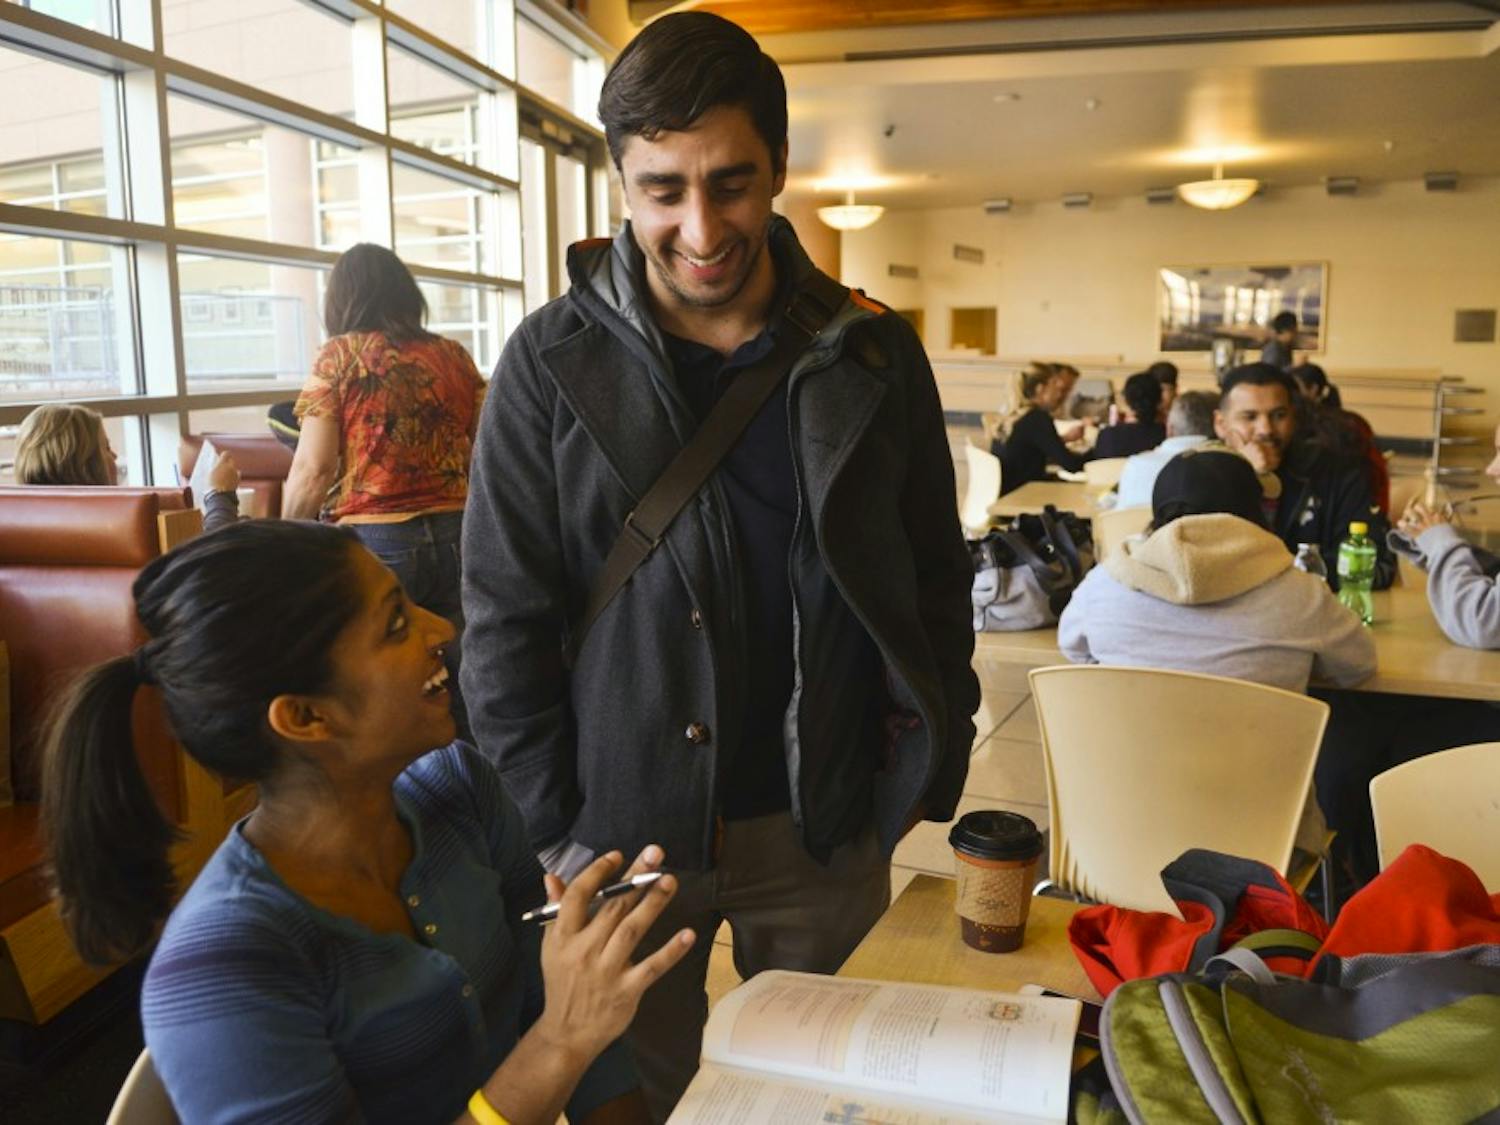 James Besante, (right) recipient of The Nicholas Skala Student Activist award jokes about a class with Aditi Majumdar (left), fellow medical student in the cafeteria at UNM Hospital.